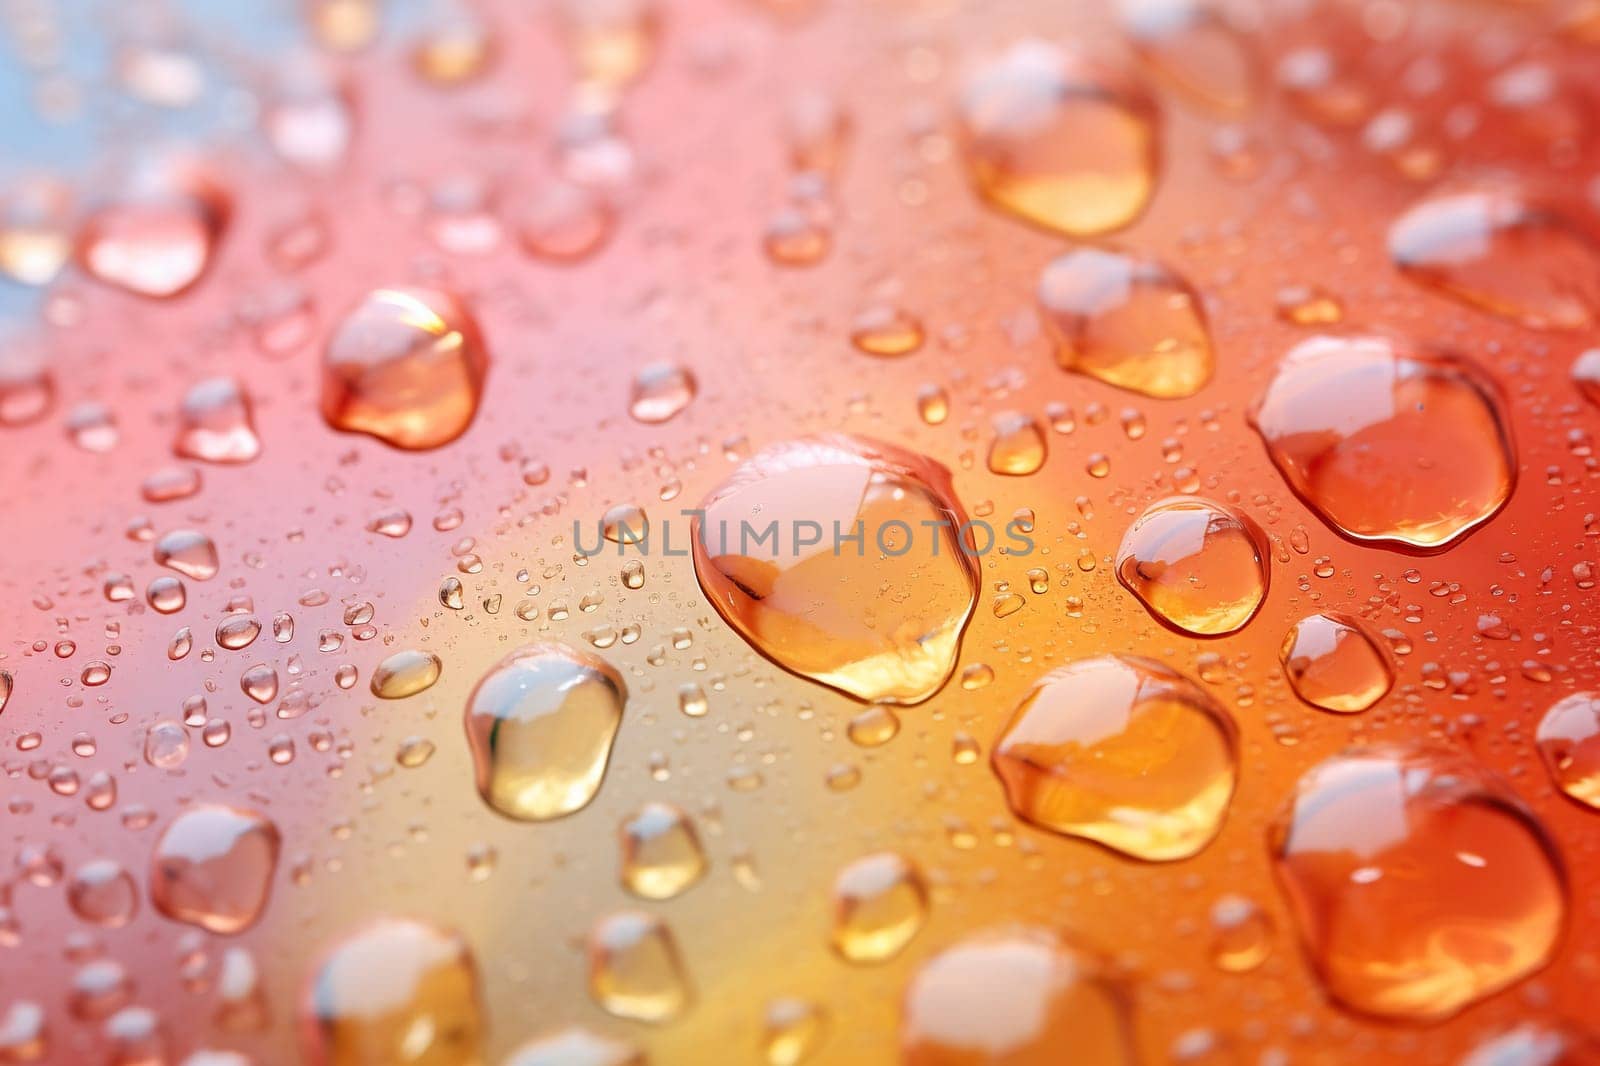 Water drops on orange surface surface.